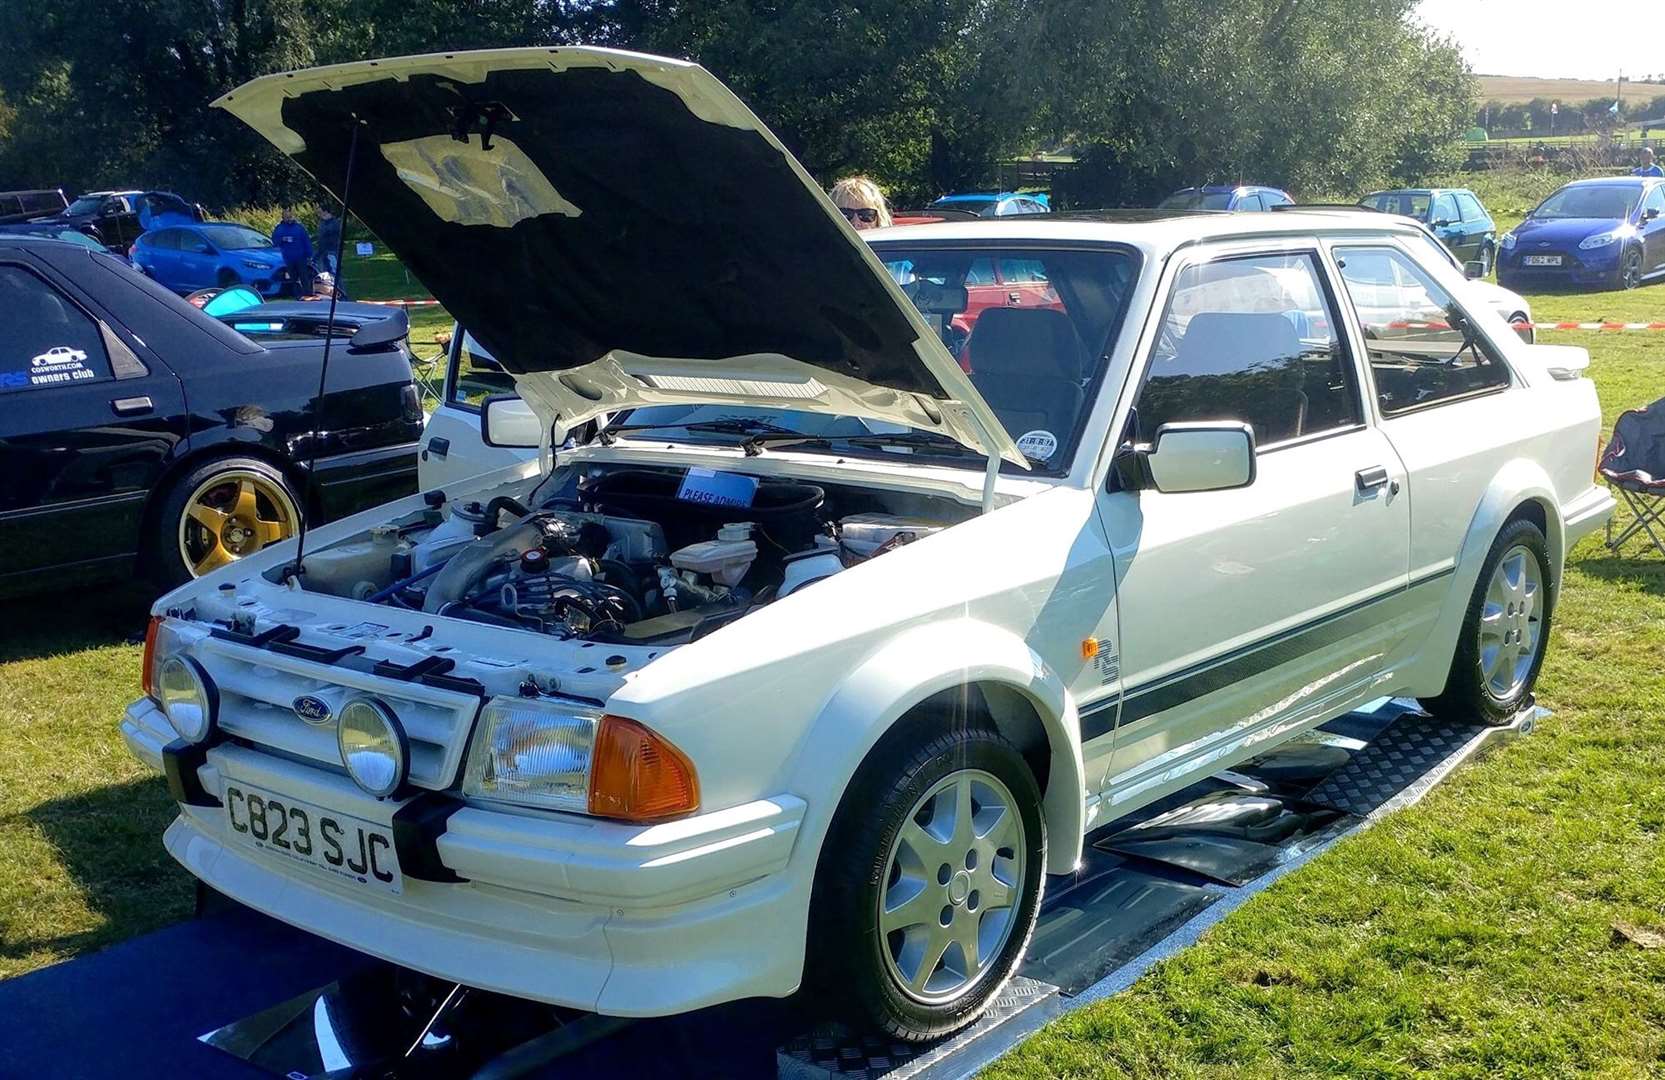 The winning car at one of the regional shows held by the RS Owners Club.